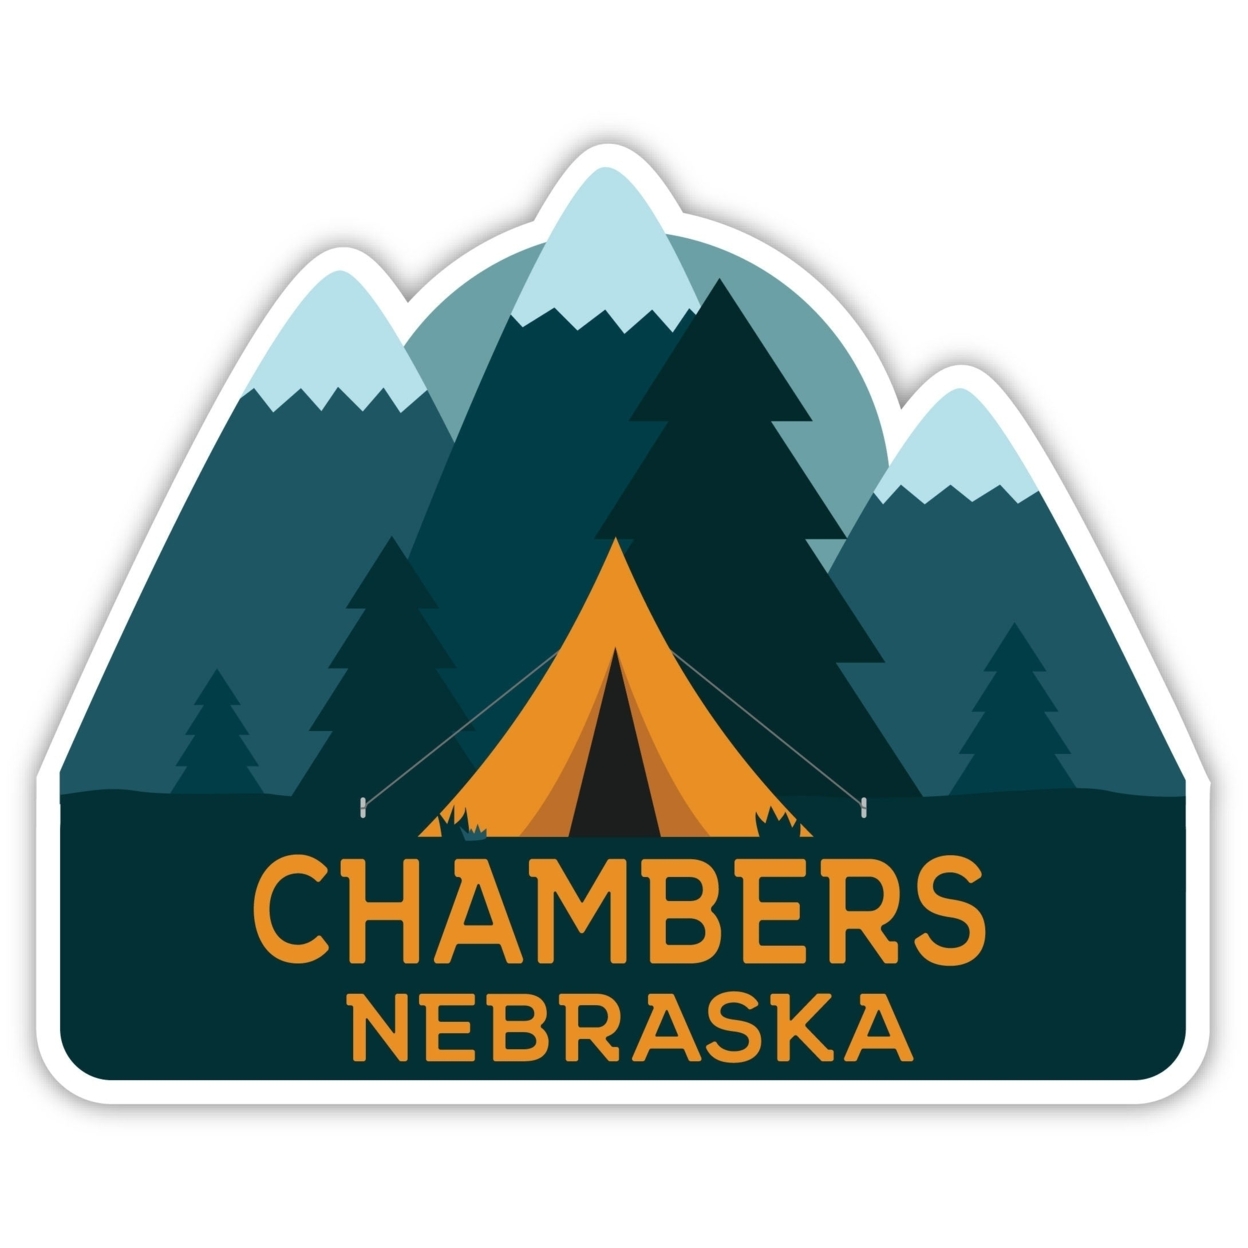 Chambers Nebraska Souvenir Decorative Stickers (Choose Theme And Size) - 4-Pack, 10-Inch, Tent